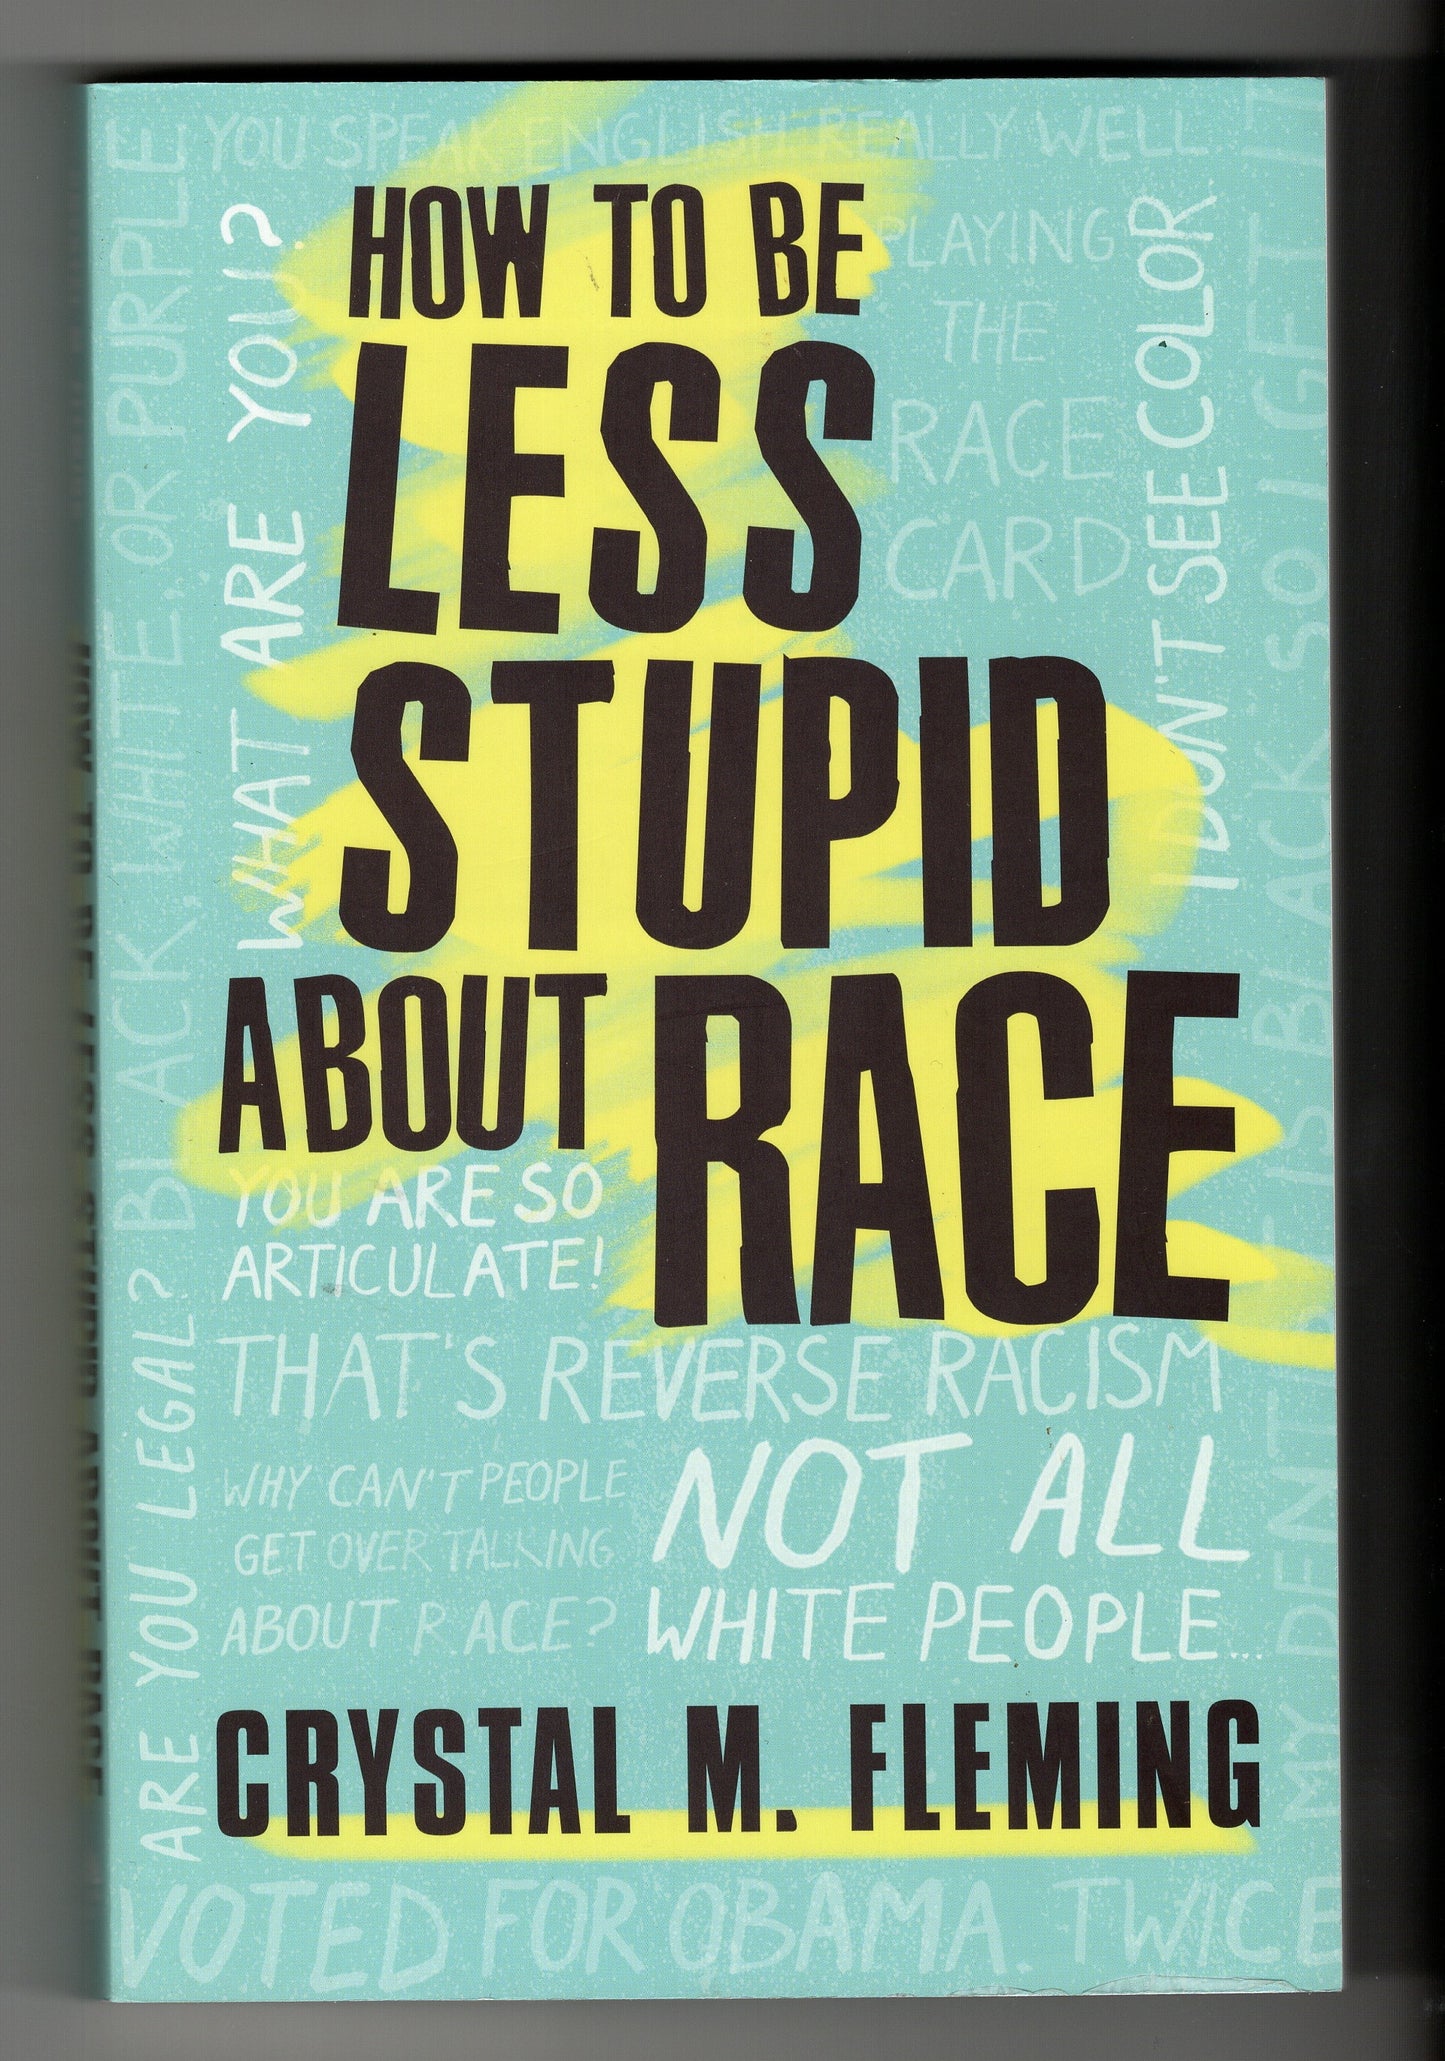 Crystal M. Fleming - To Be Less Stupid About Race